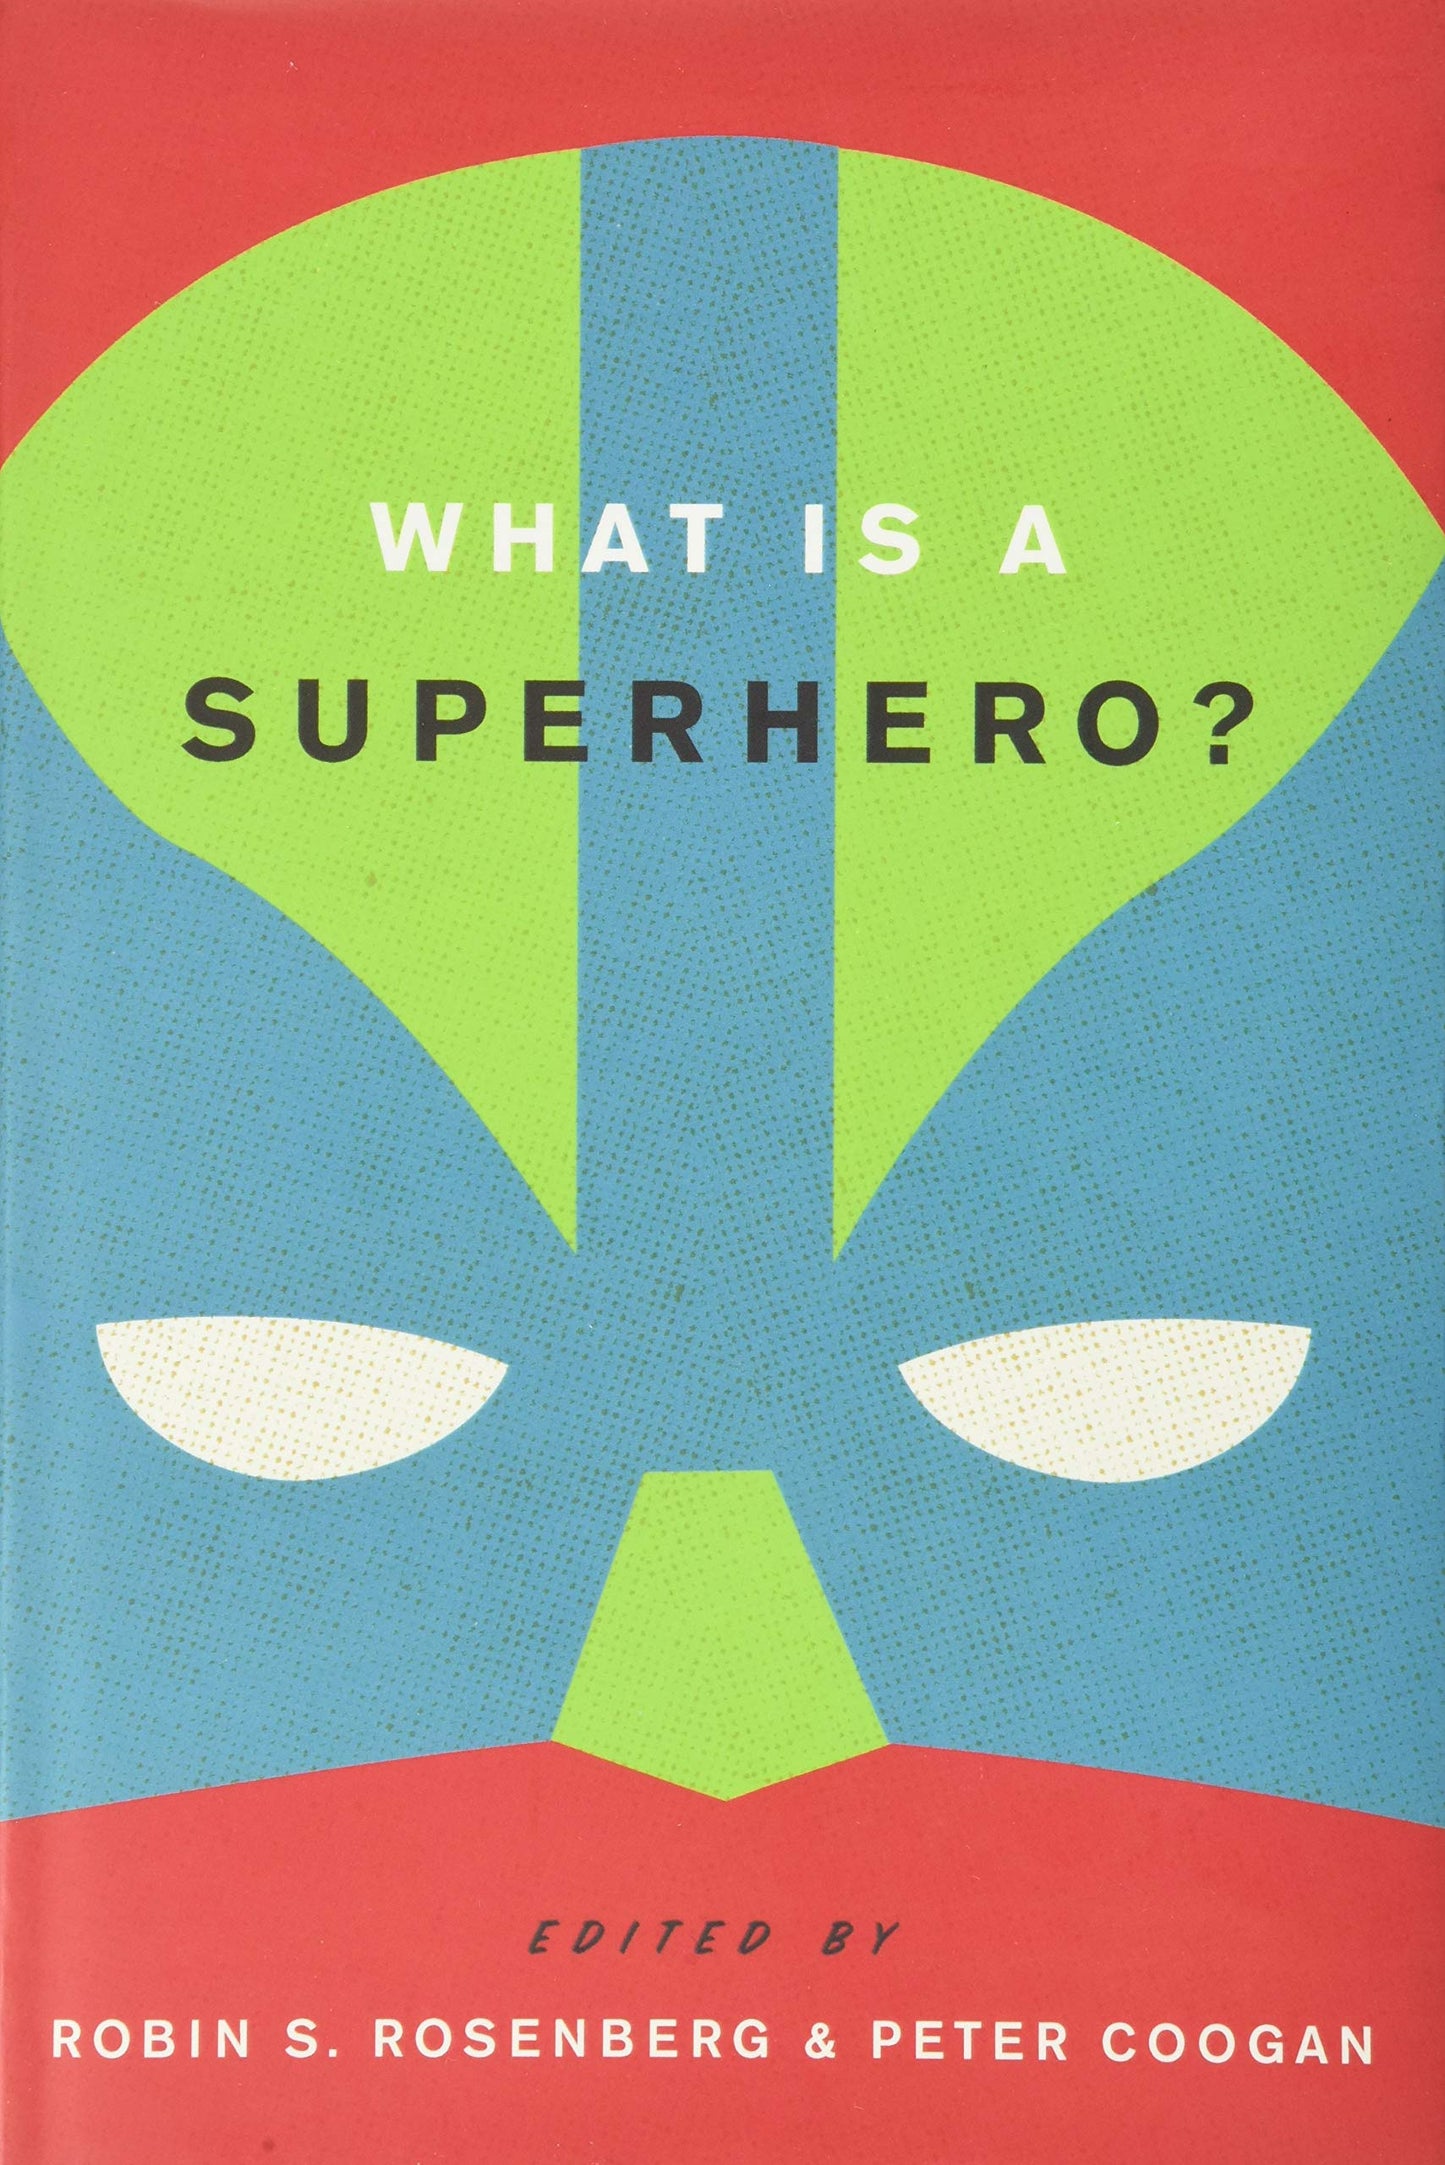 What is a Superhero